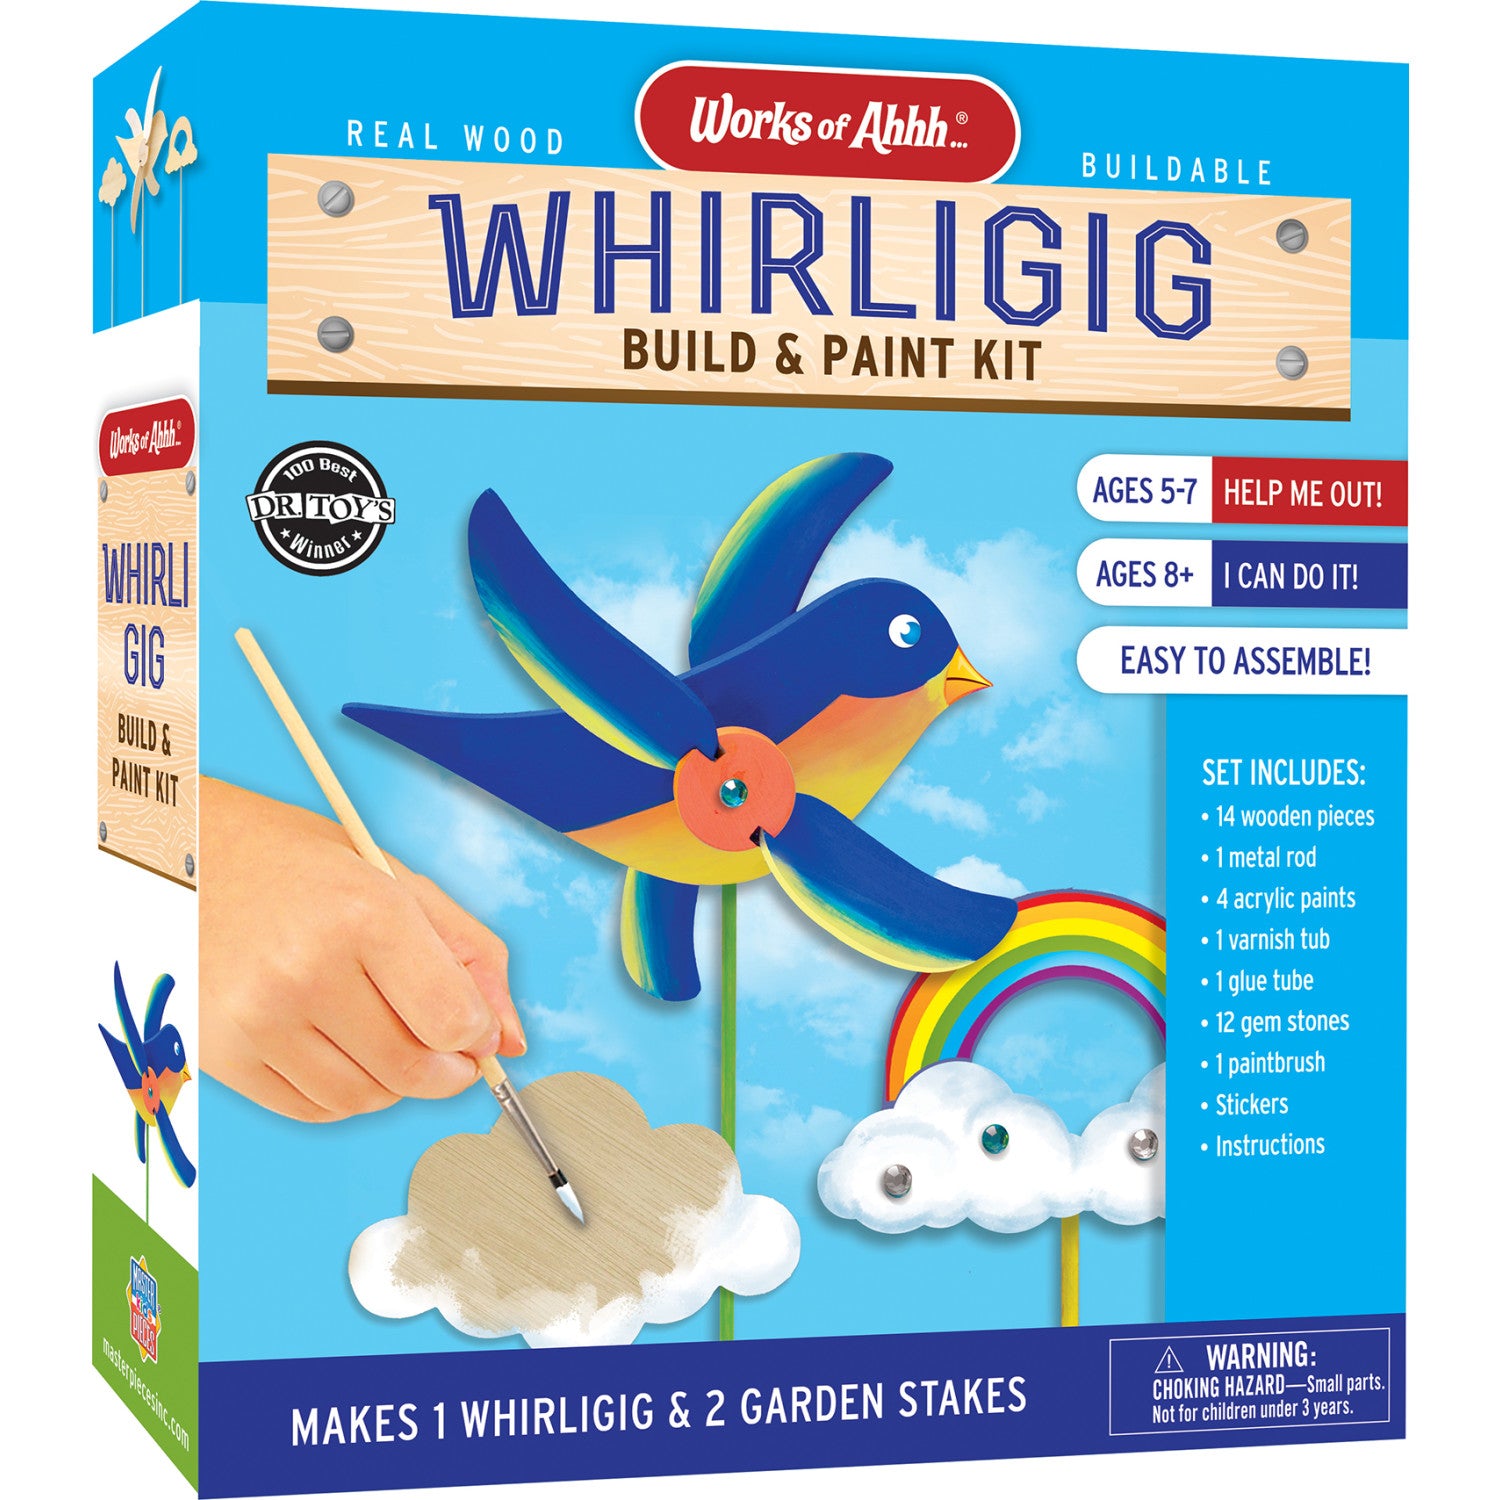 Whirligig Buildable Wood Craft & Paint Kit